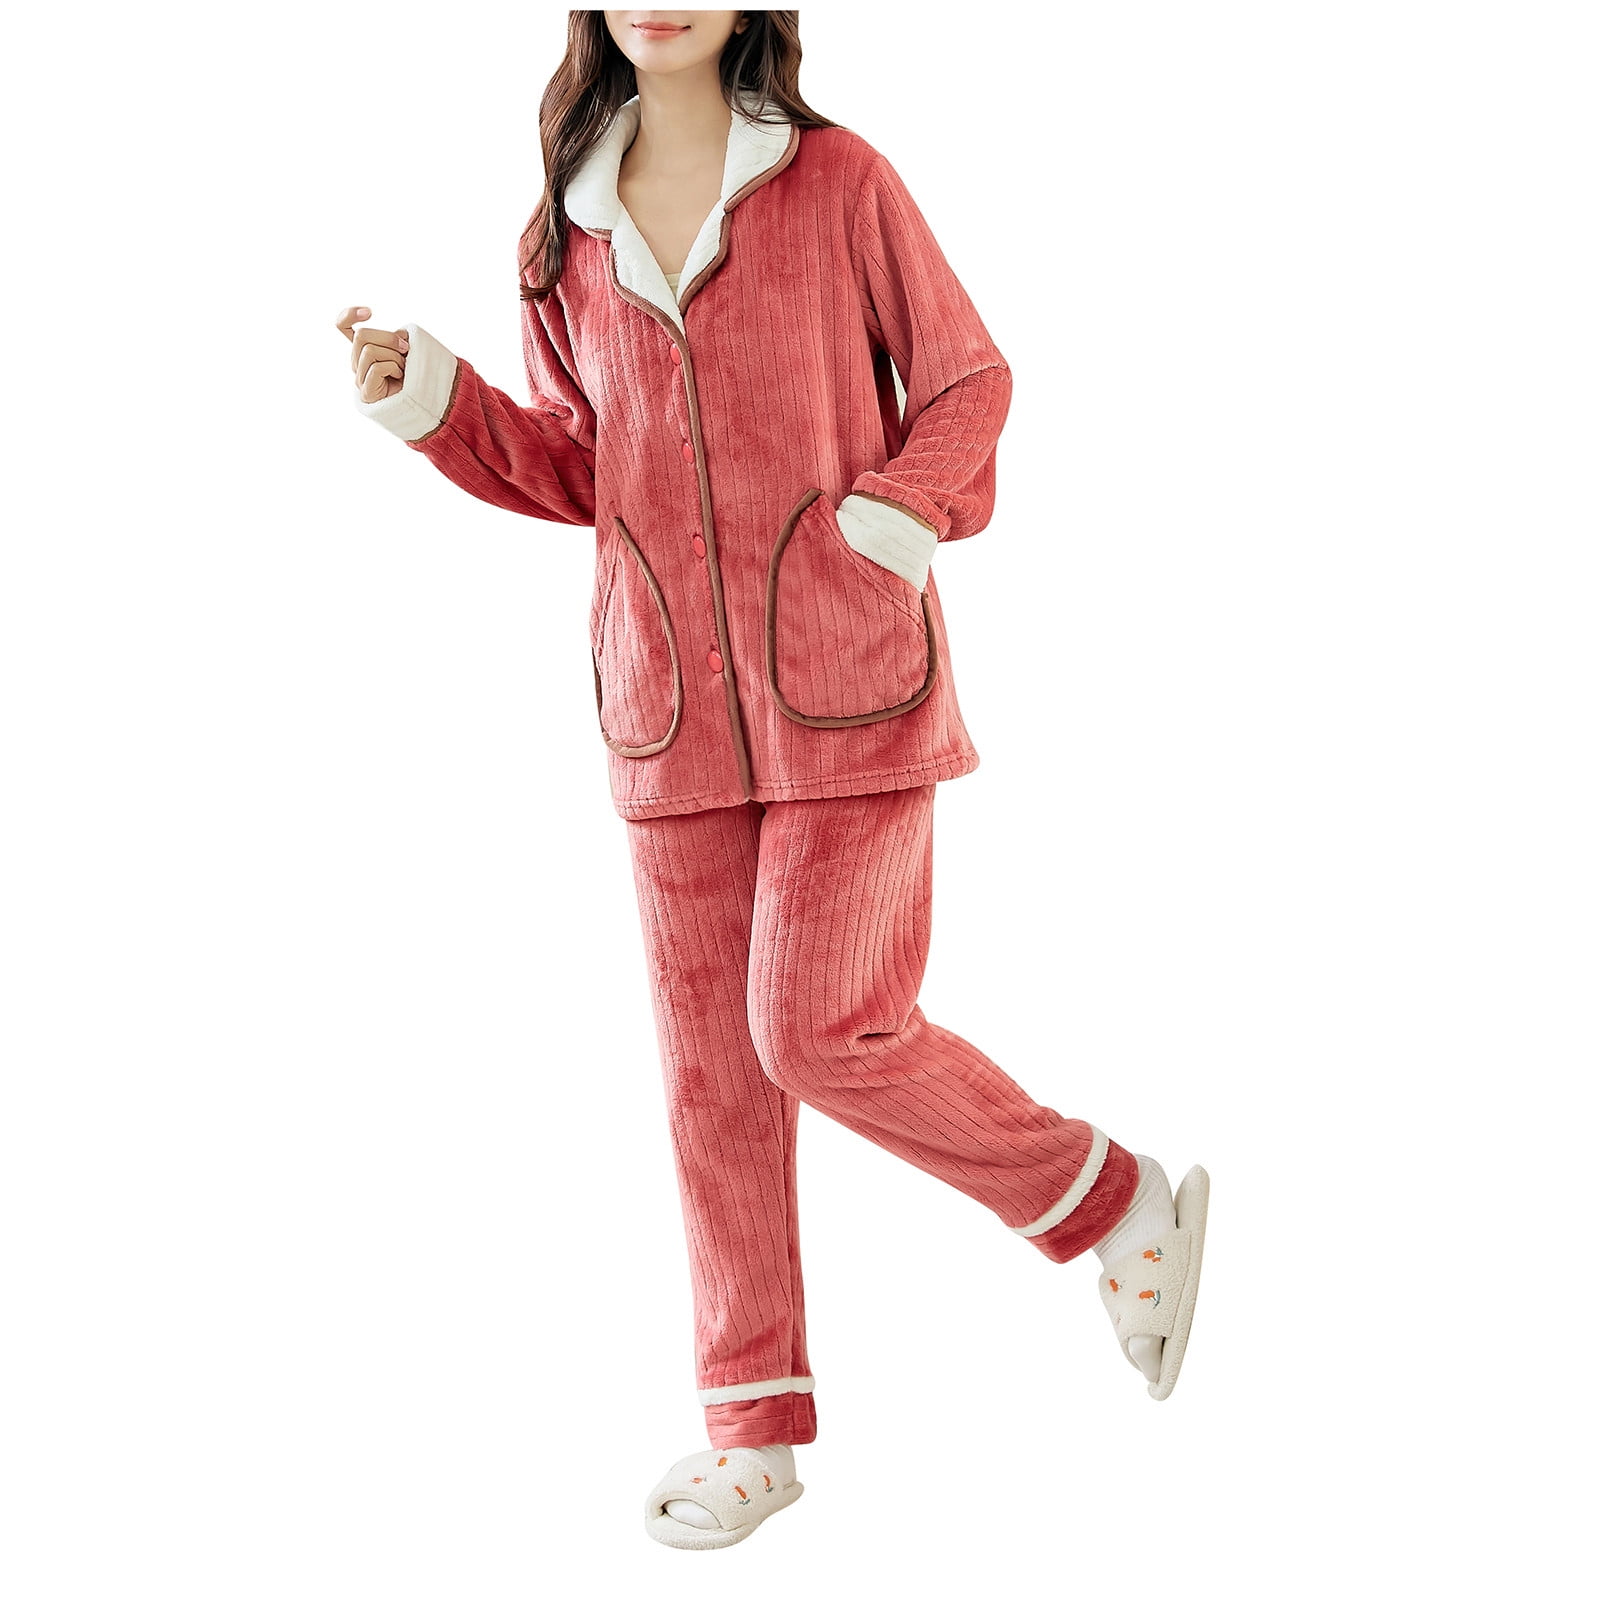 New winter thickened flannel couple pajamas suit men and women coral fleece  warm home service set simple two piece set sleepwear